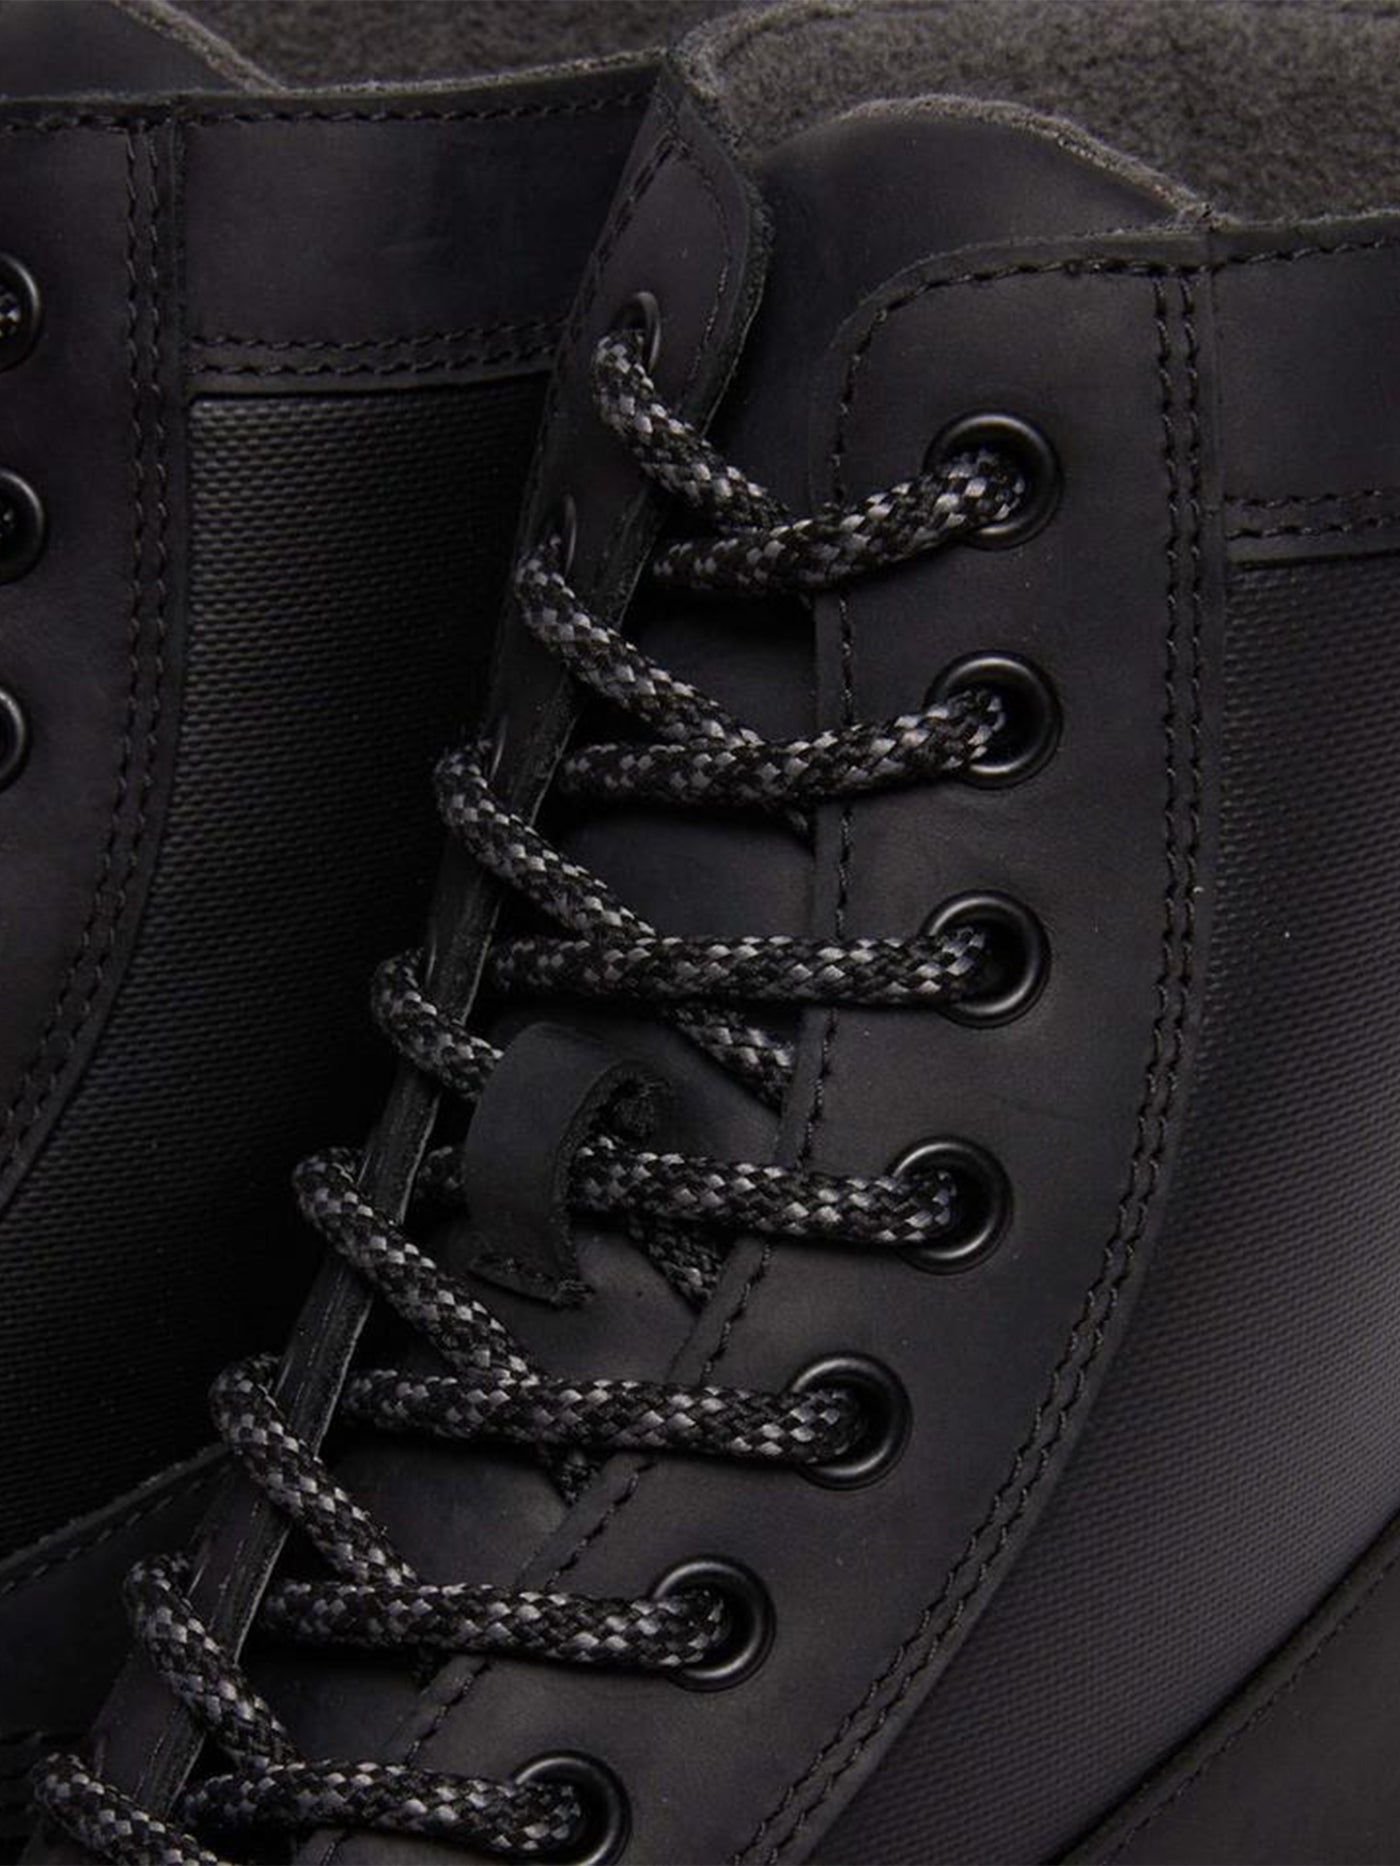 Dr. Martens 1460 Trinity Connection Black Boots Holiday 2023